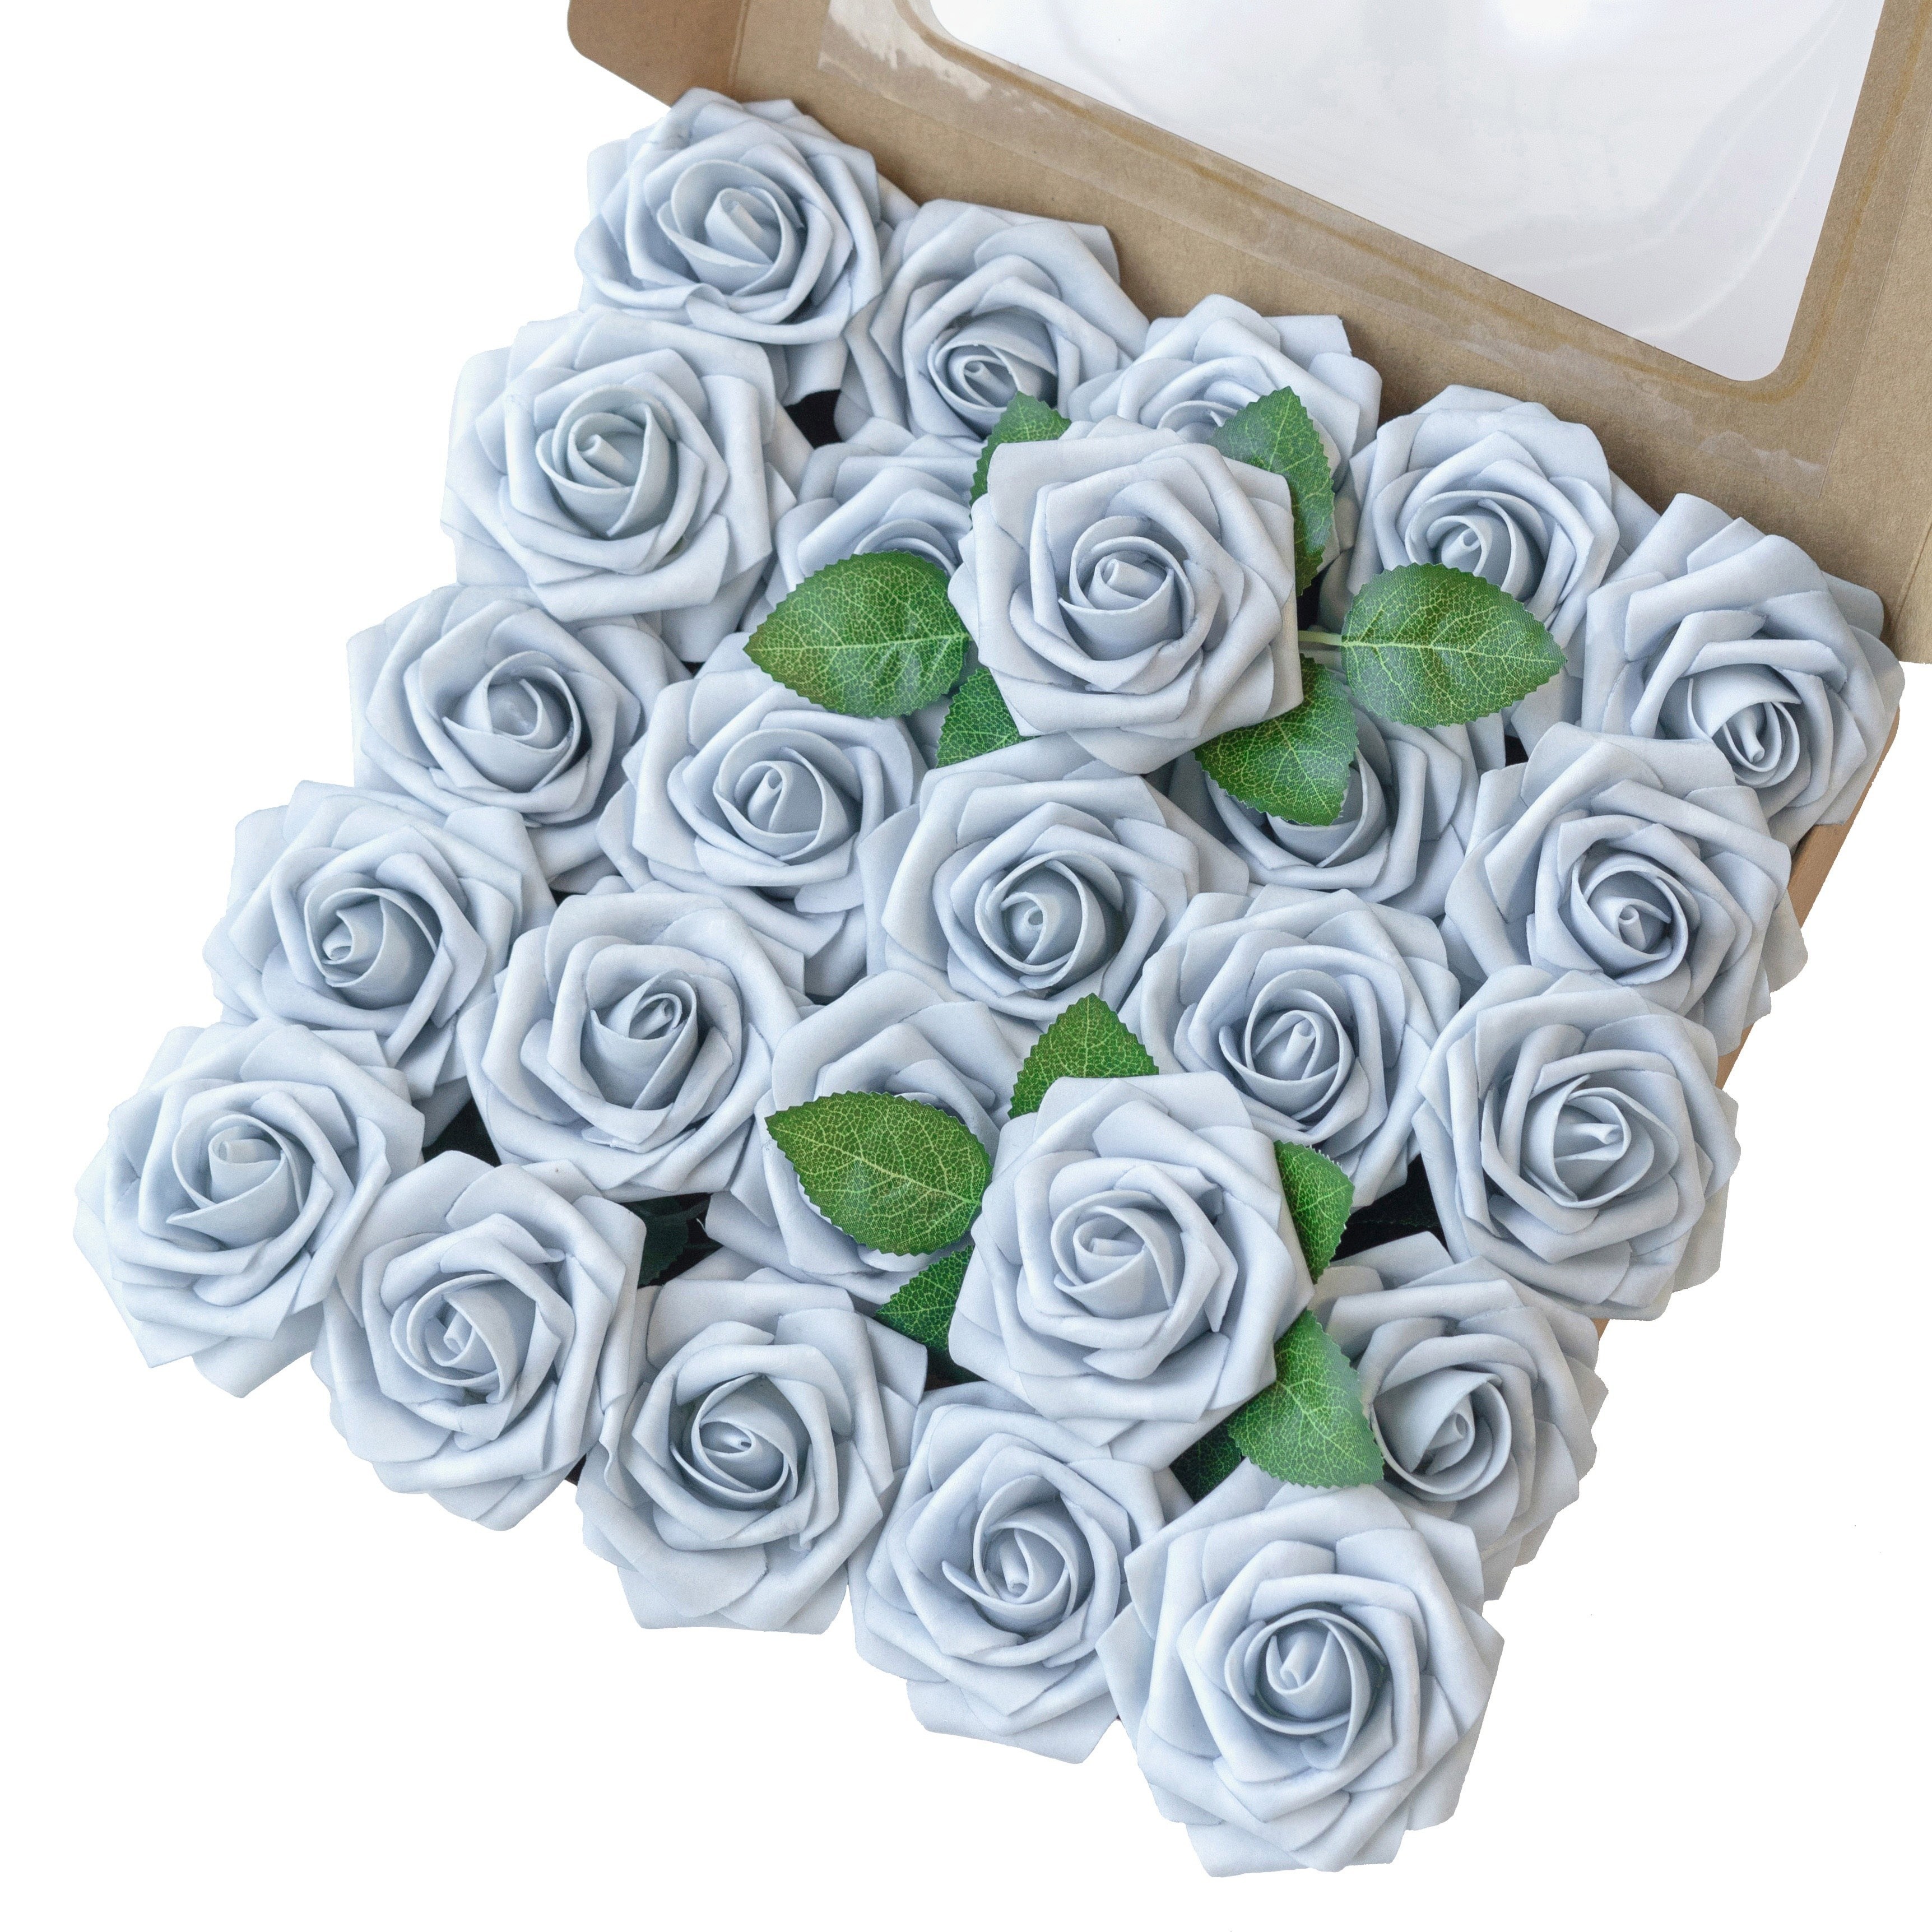 

25pcs Powder Blue Artificial Roses - Real Touch Fake Flowers With Stem For Weddings, Parties & More!